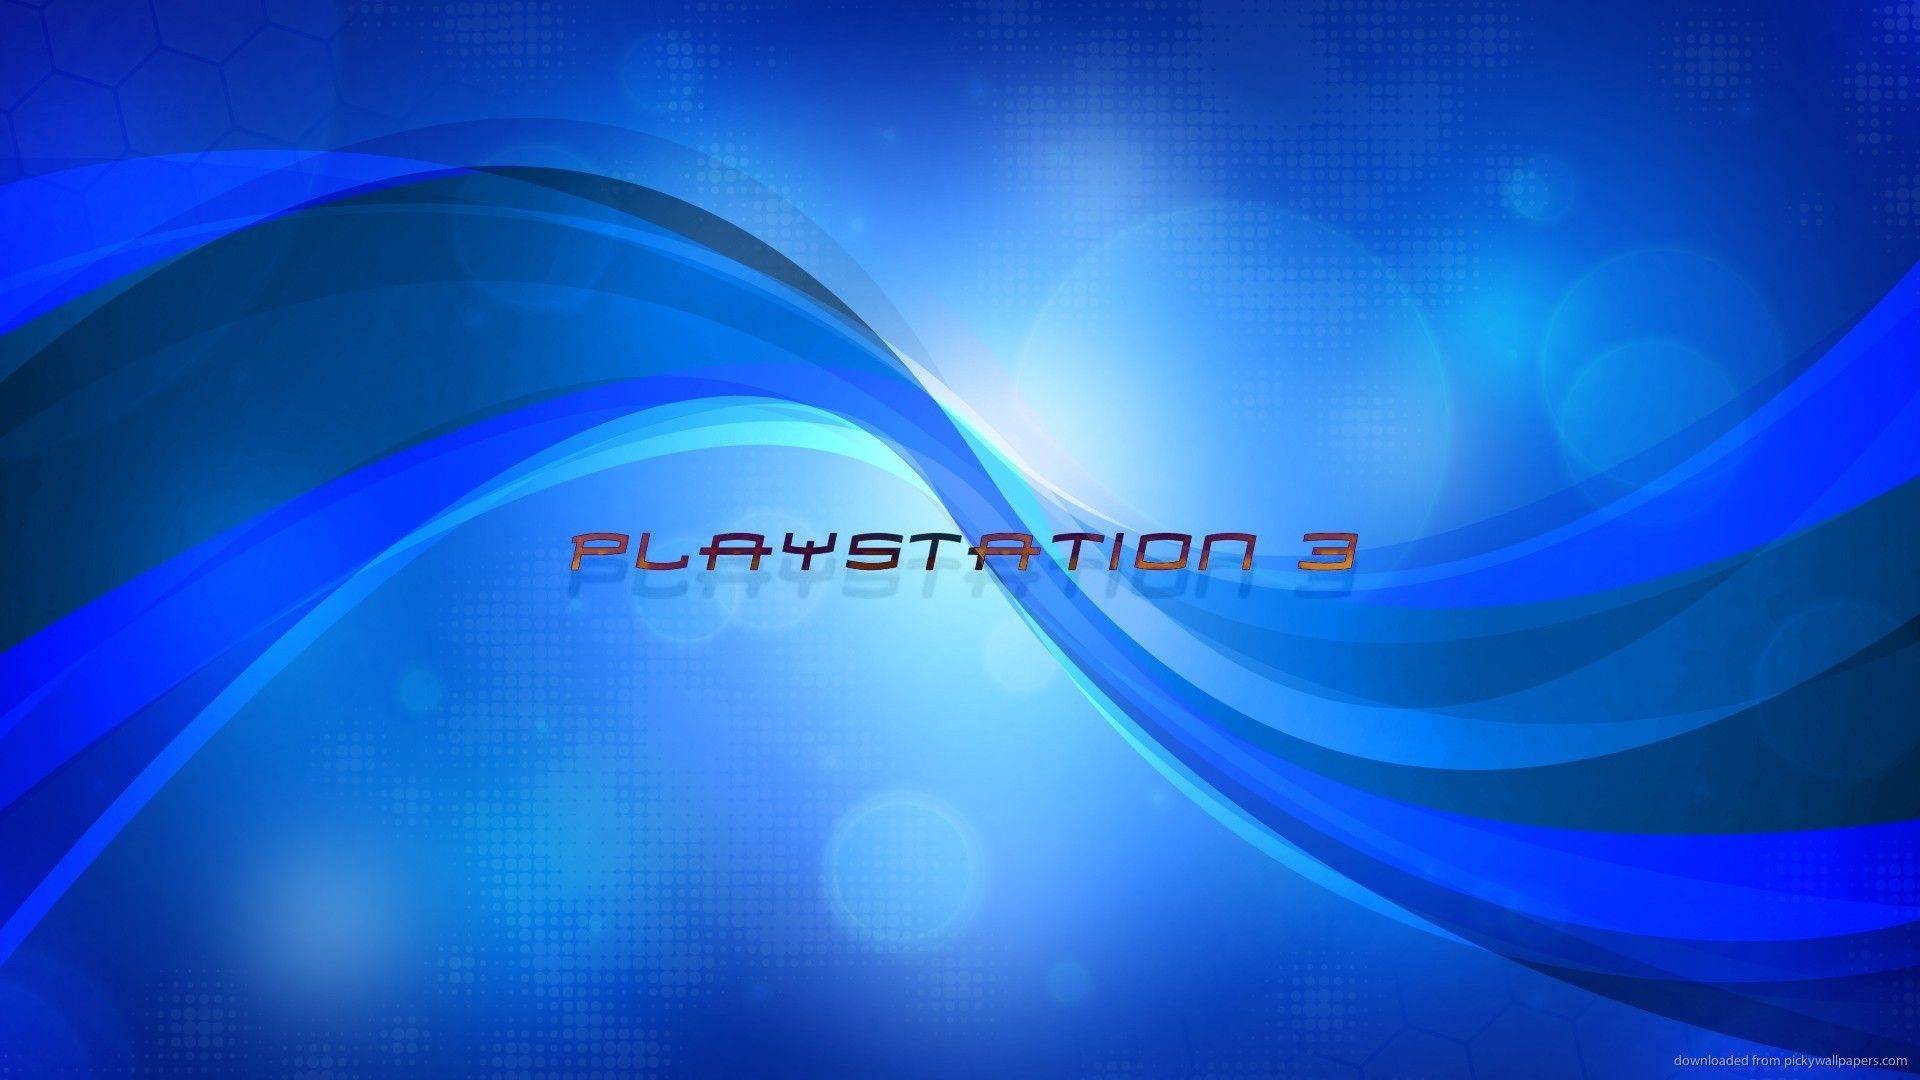 Play Station 3 Wallpapers